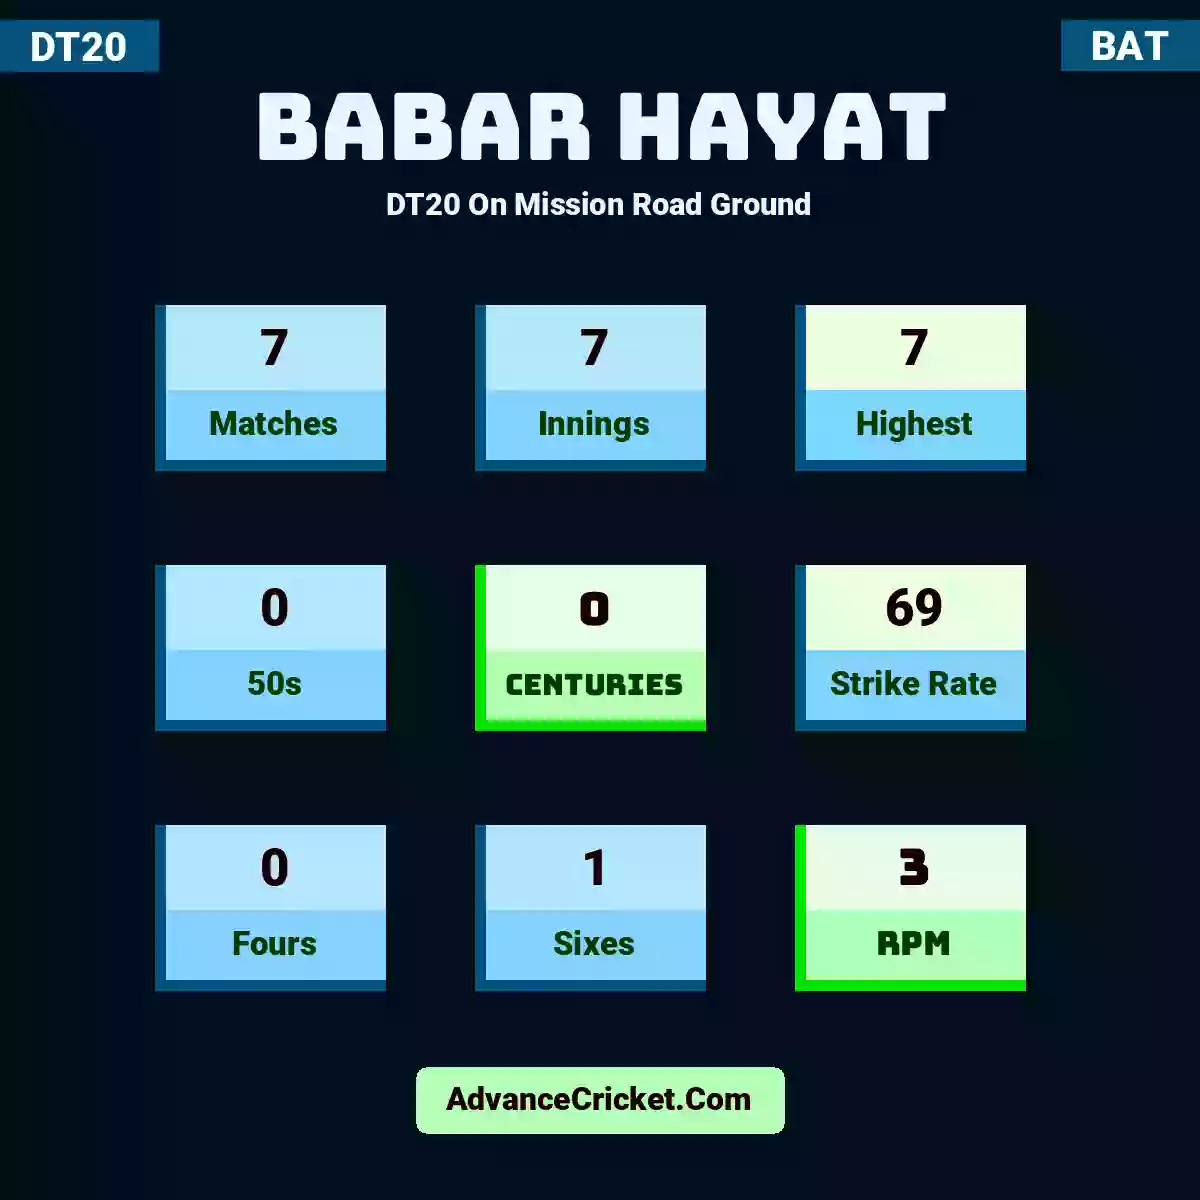 Babar Hayat DT20  On Mission Road Ground, Babar Hayat played 7 matches, scored 7 runs as highest, 0 half-centuries, and 0 centuries, with a strike rate of 69. B.Hayat hit 0 fours and 1 sixes, with an RPM of 3.